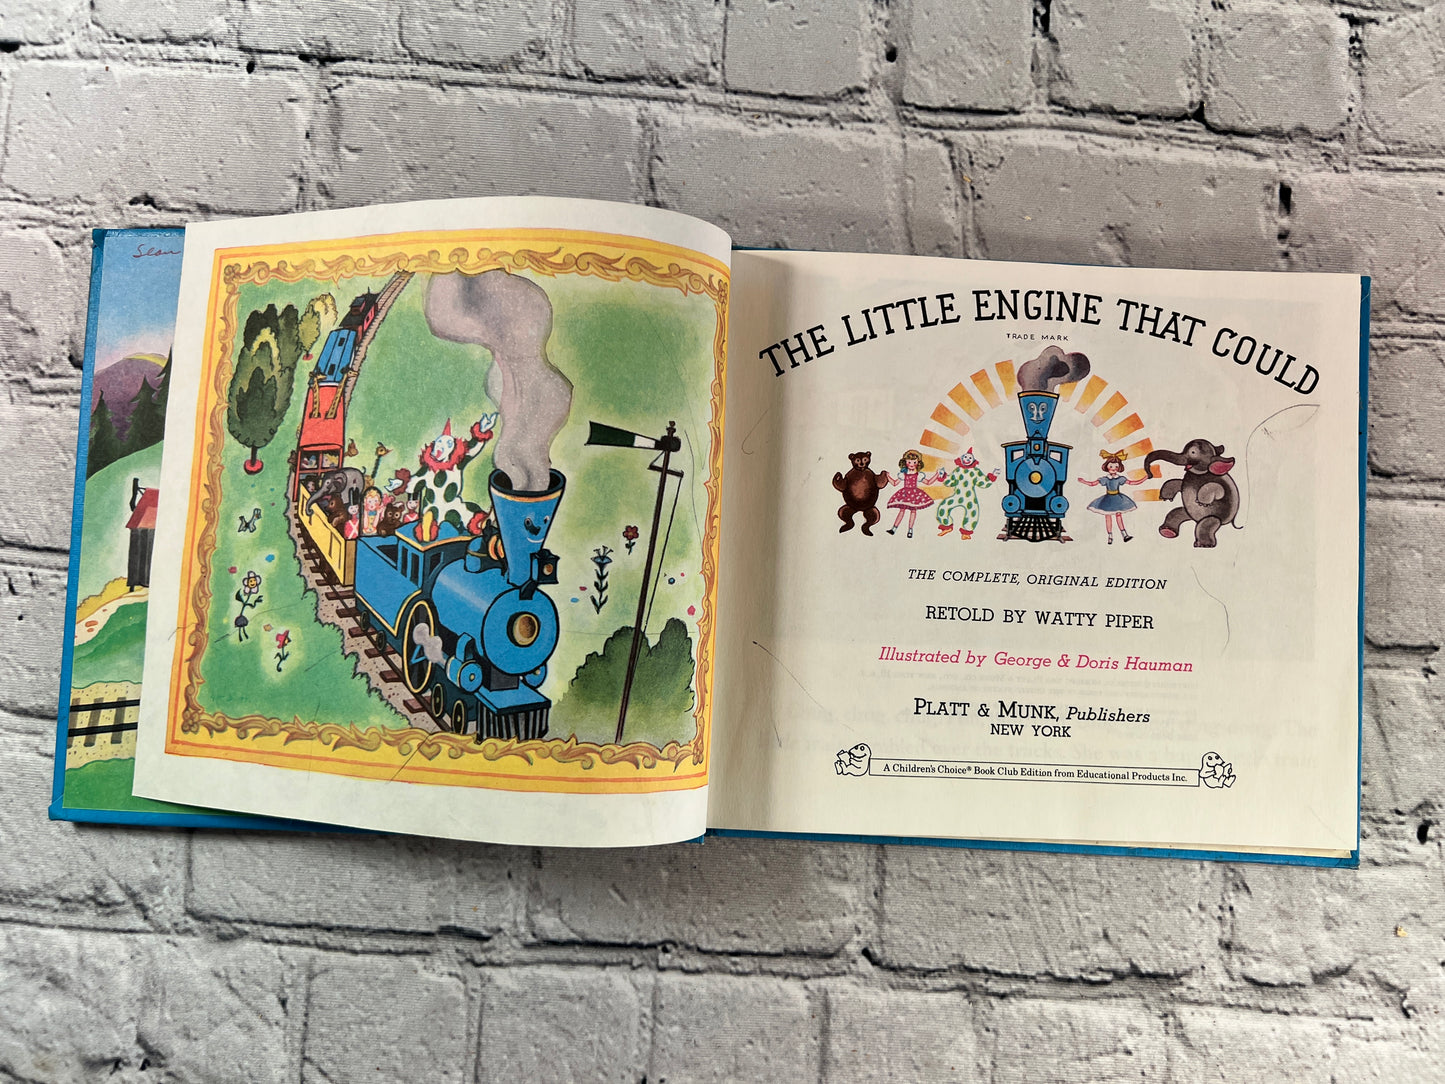 The Little Engine That Could by Watty Piper [Complete Original Edition · 1945]